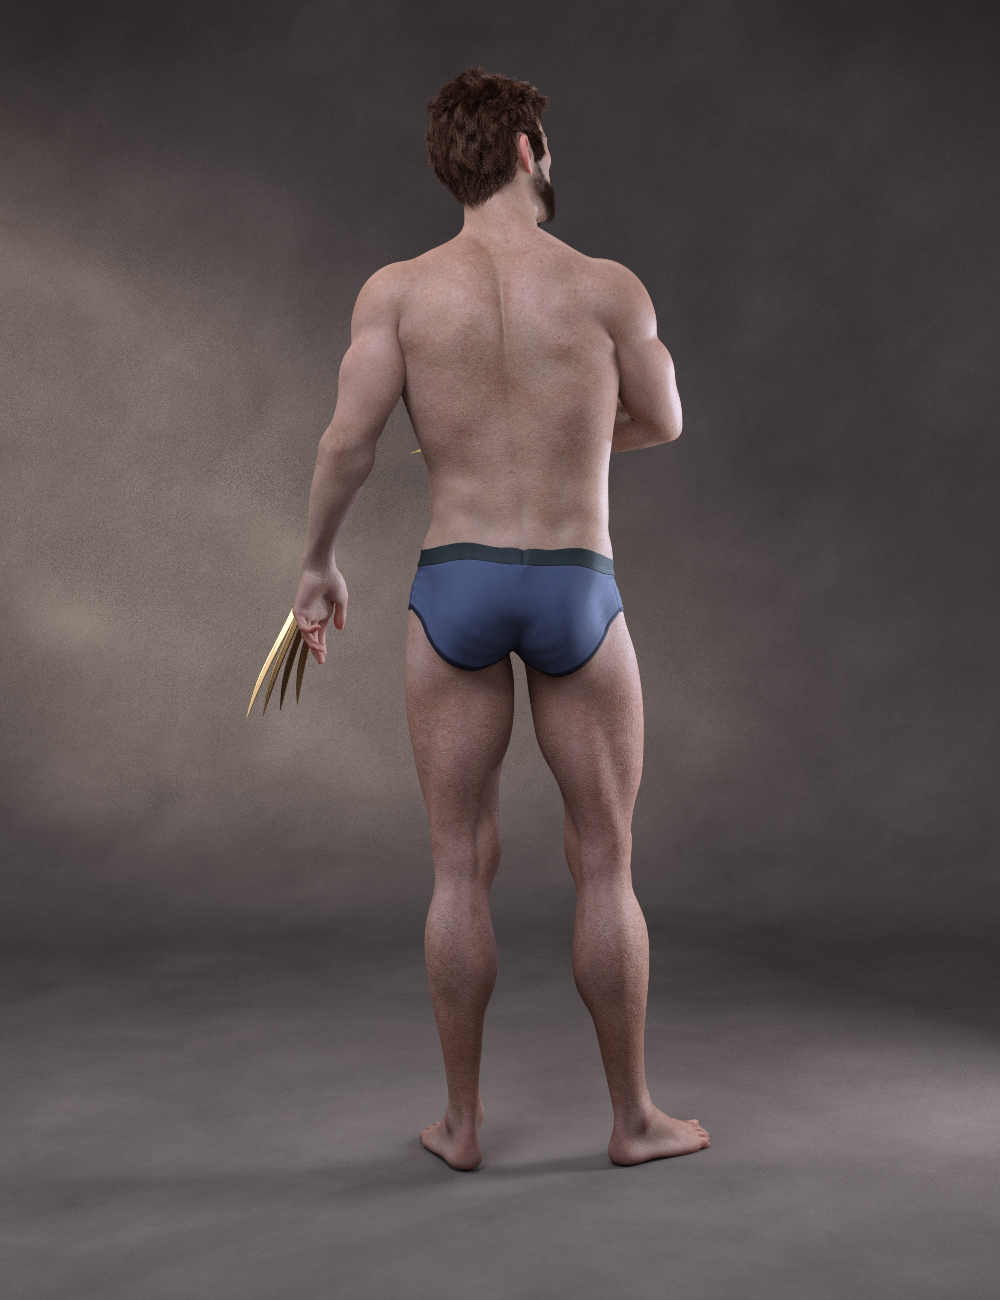 James for Christian 8 by: SR3, 3D Models by Daz 3D